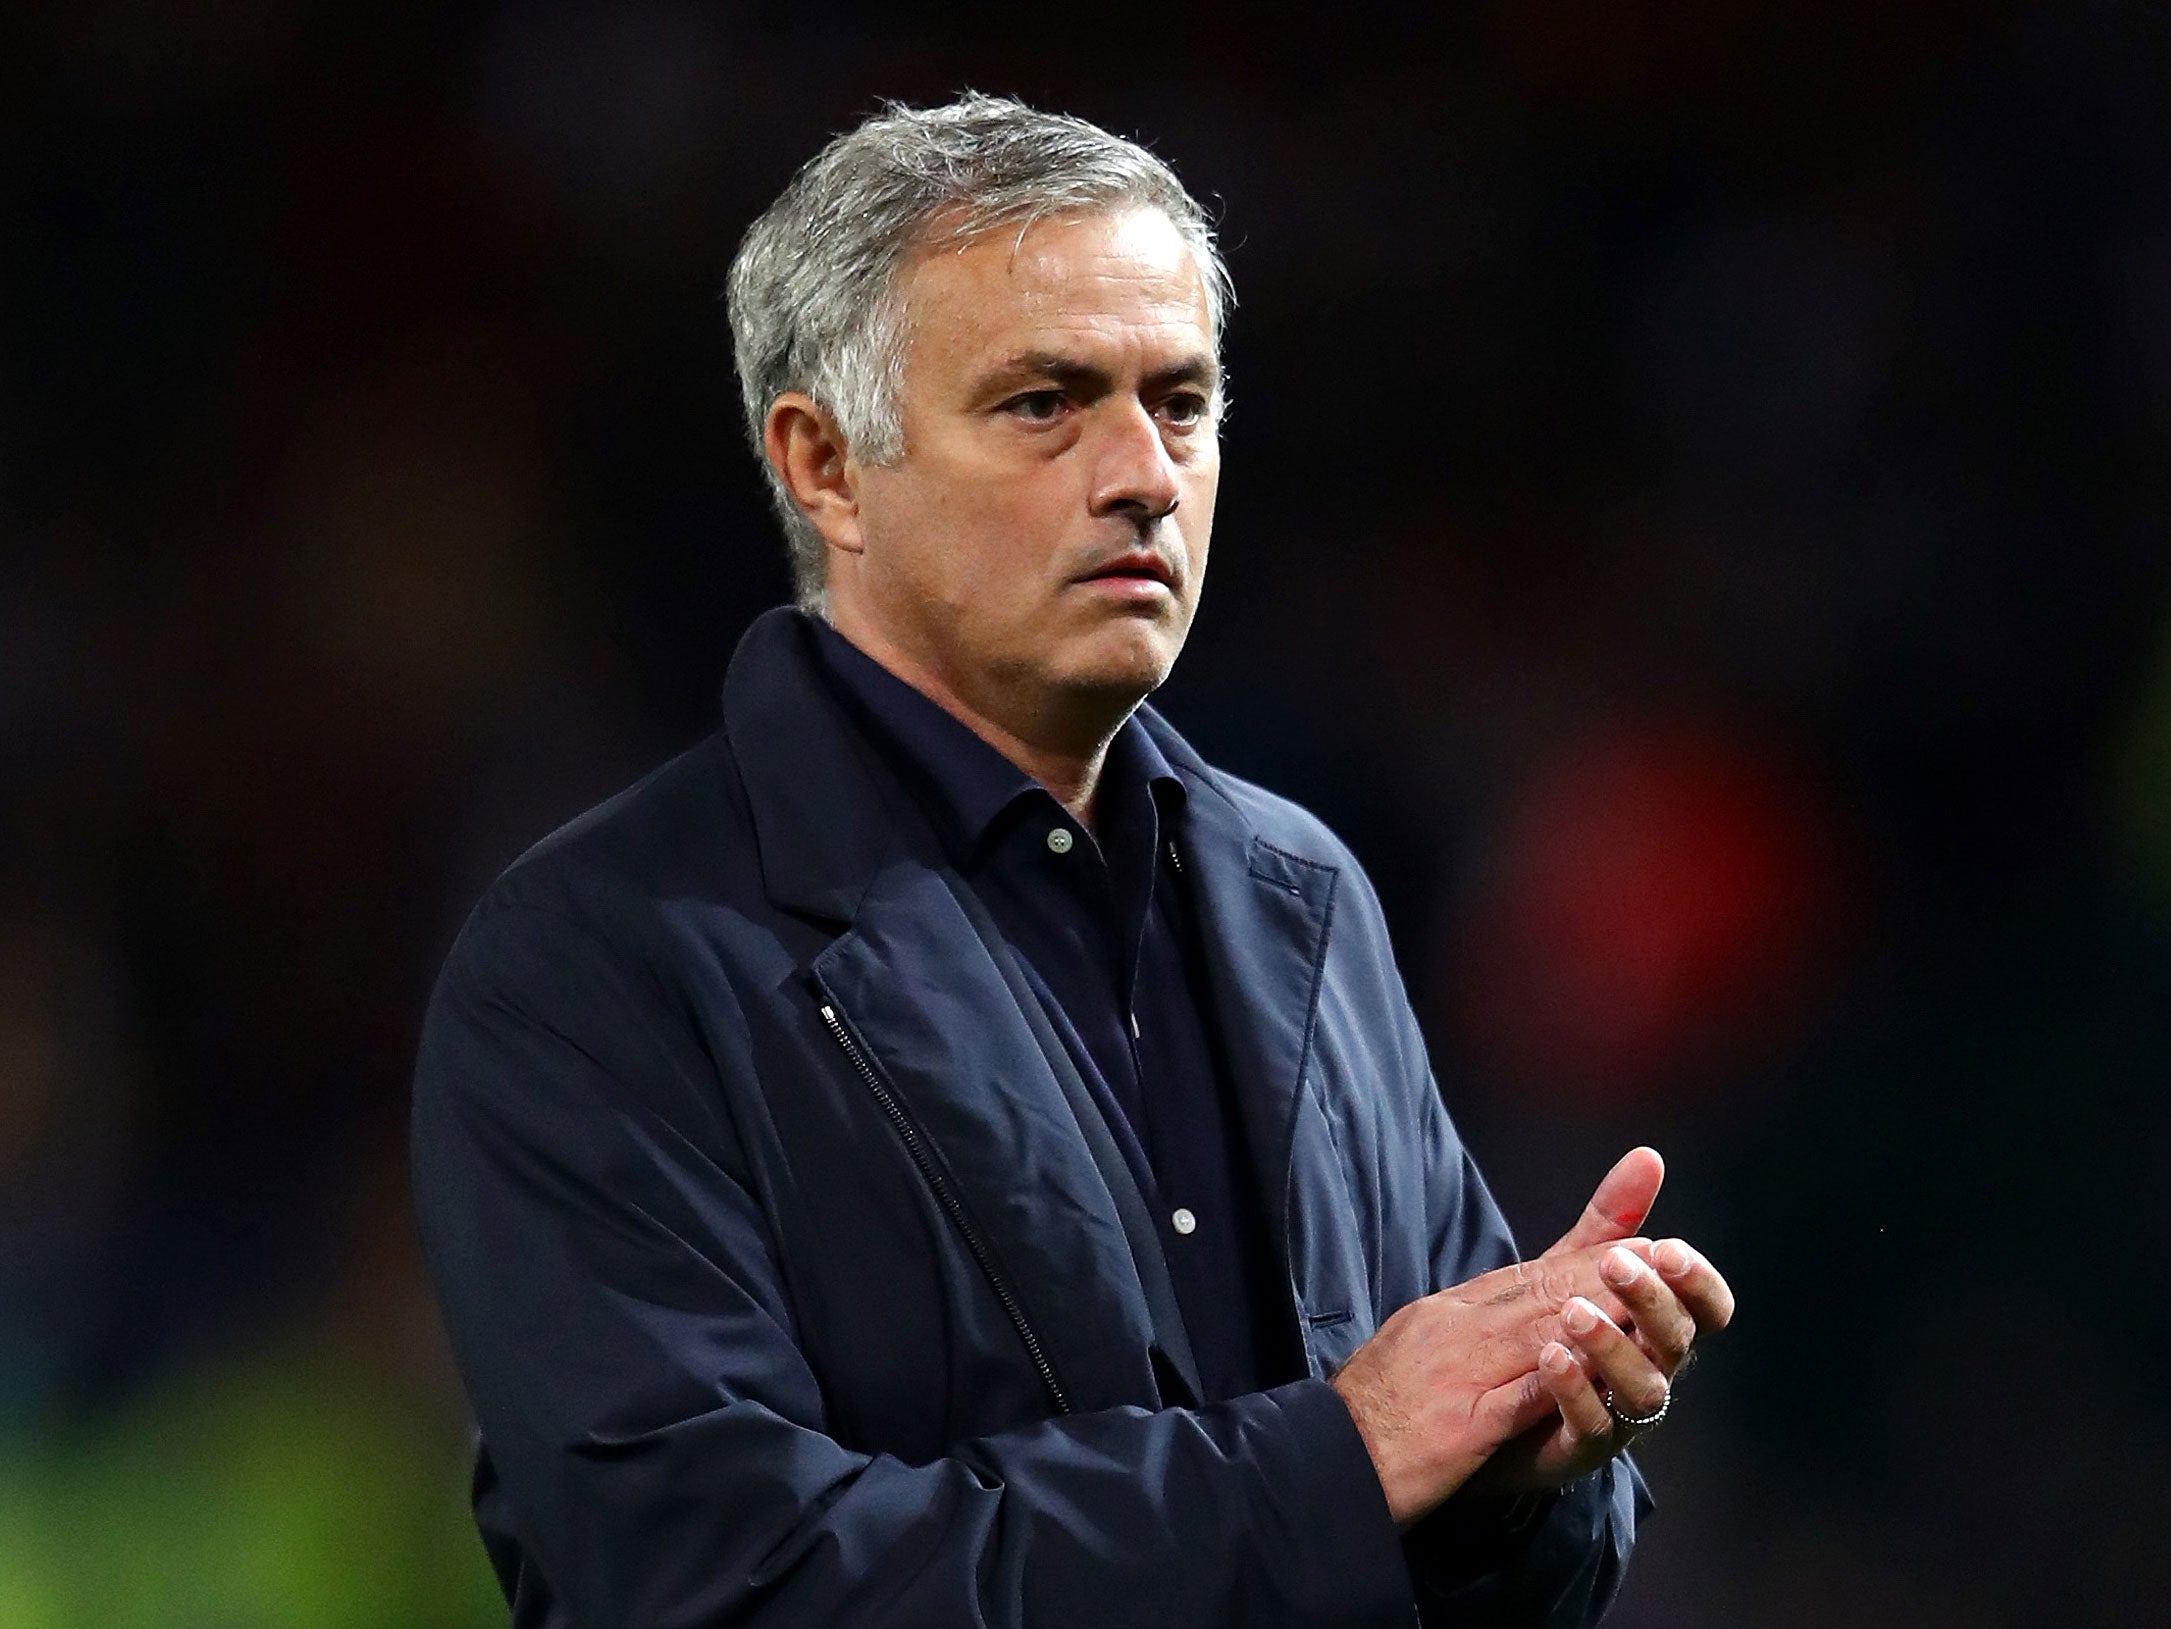 Jose Mourinho claims to have the backing of his Manchester United bosses